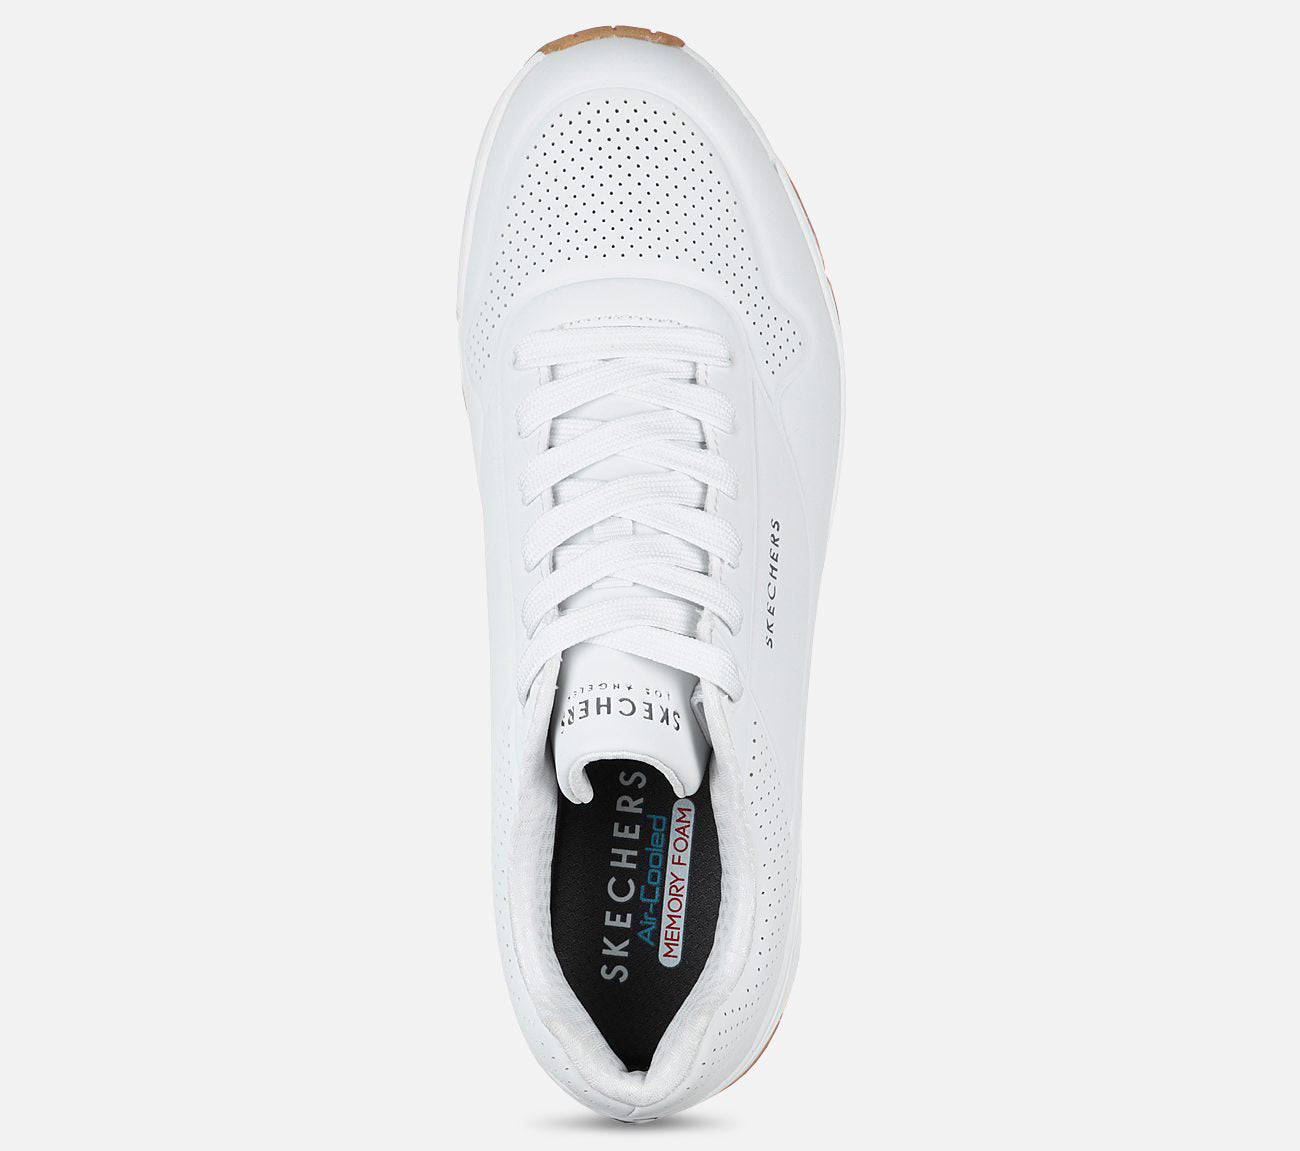 Street UNO - Stand On Air Shoe Skechers